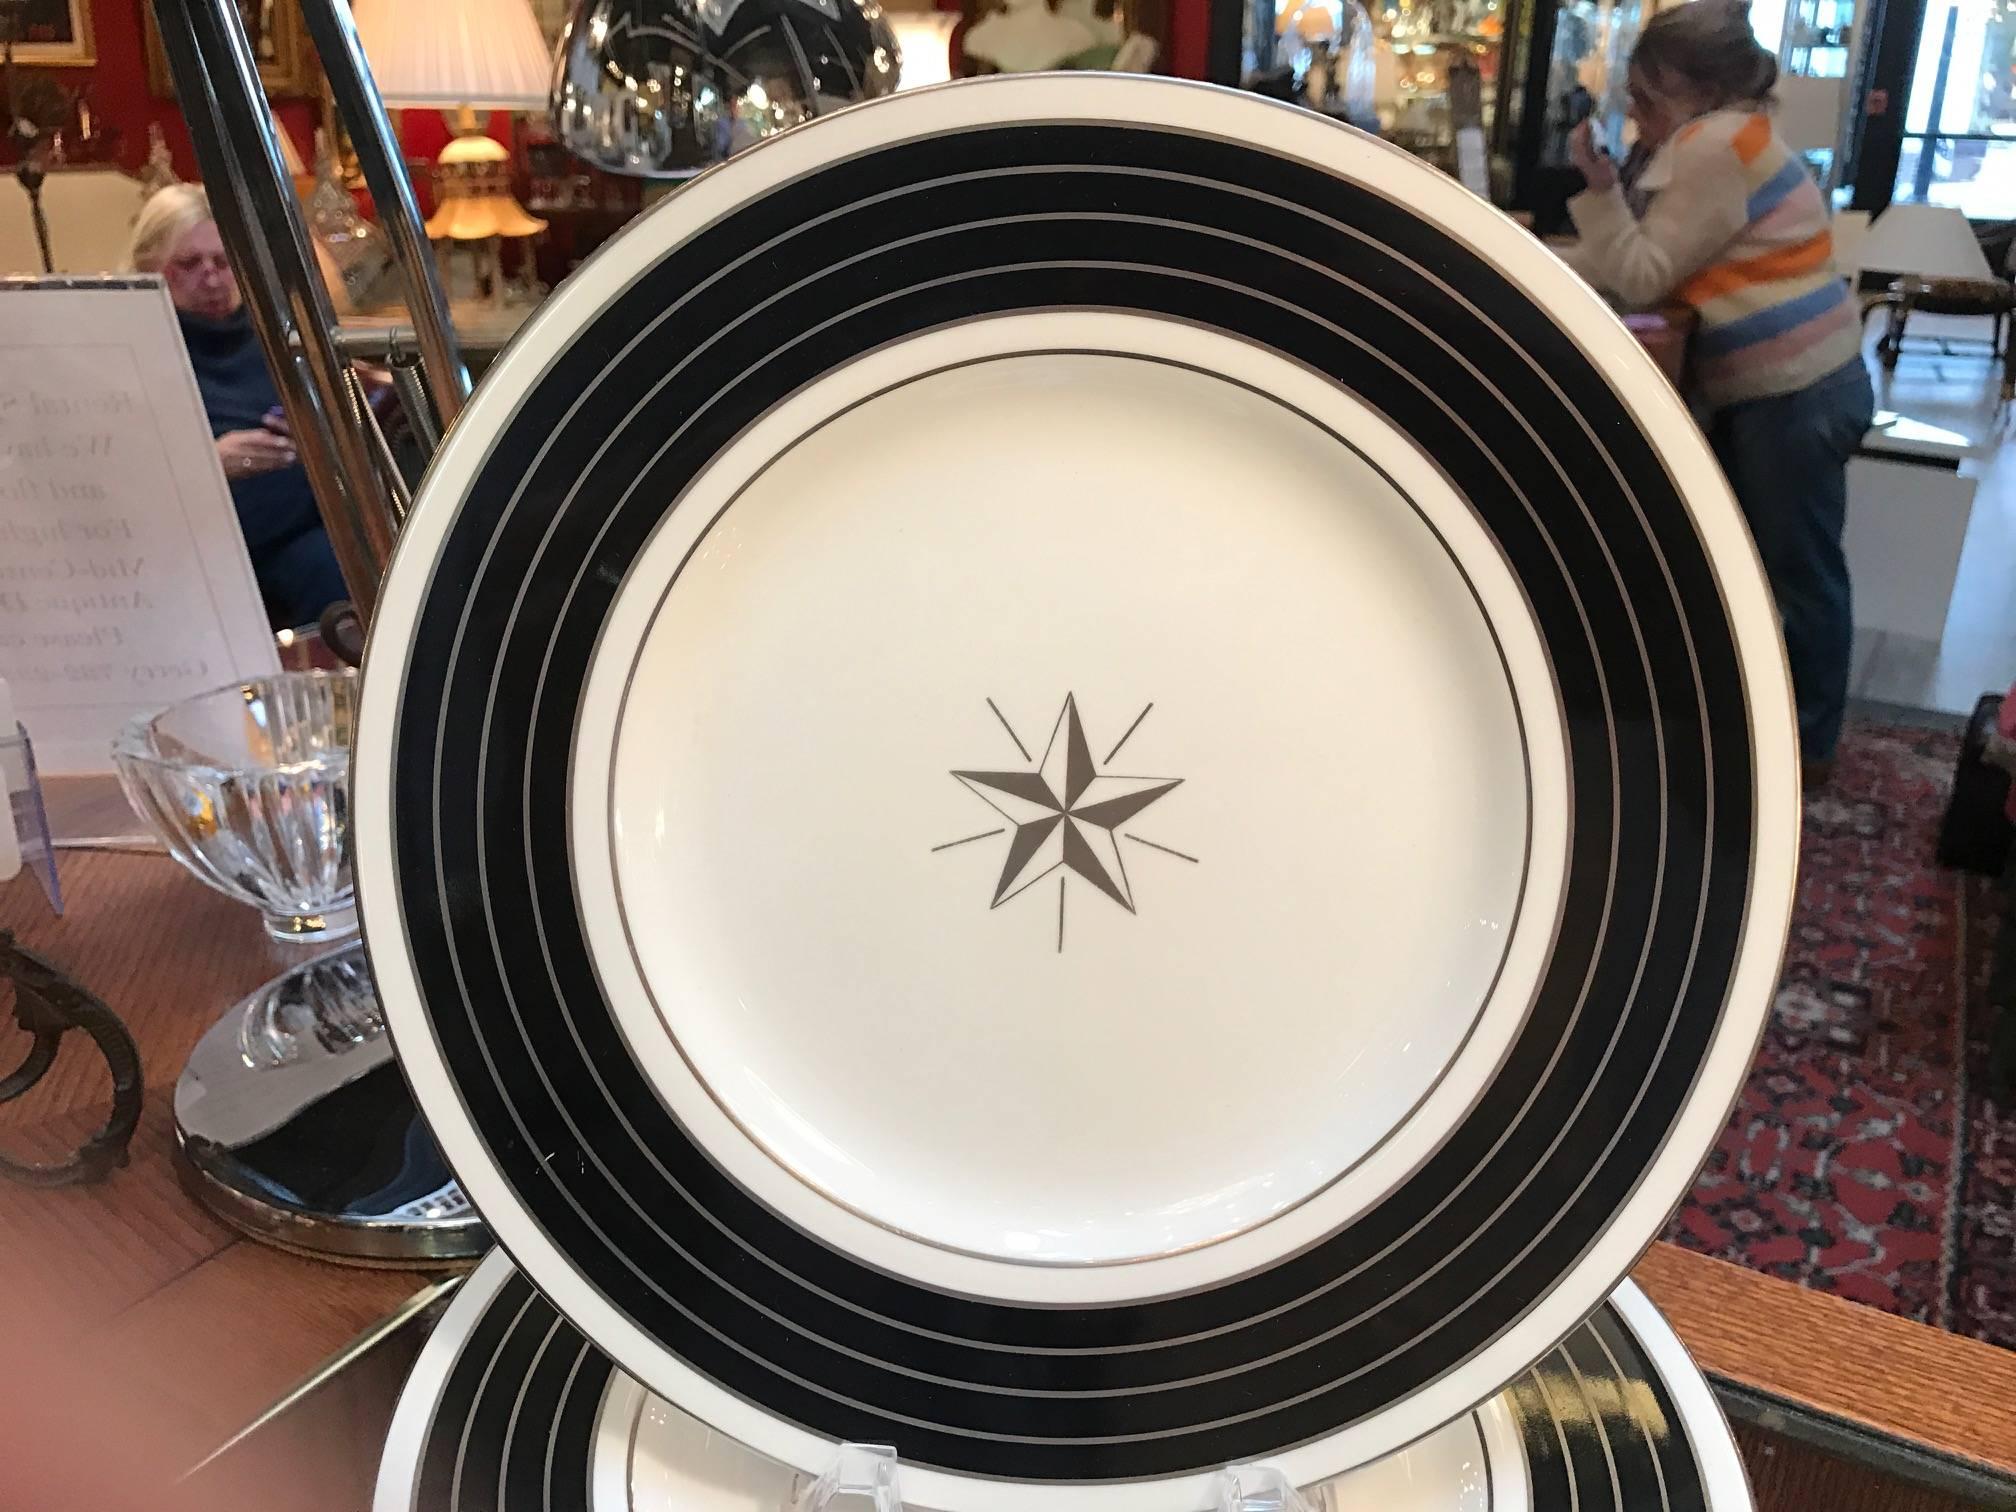 Chic set of English service plates with platinum and black borders. The mark used on these Minton plates are pre-1950, these being 1930s
The borders are alternating circles of back and platinum gilt with a center platinum gilt star medallion.
Please